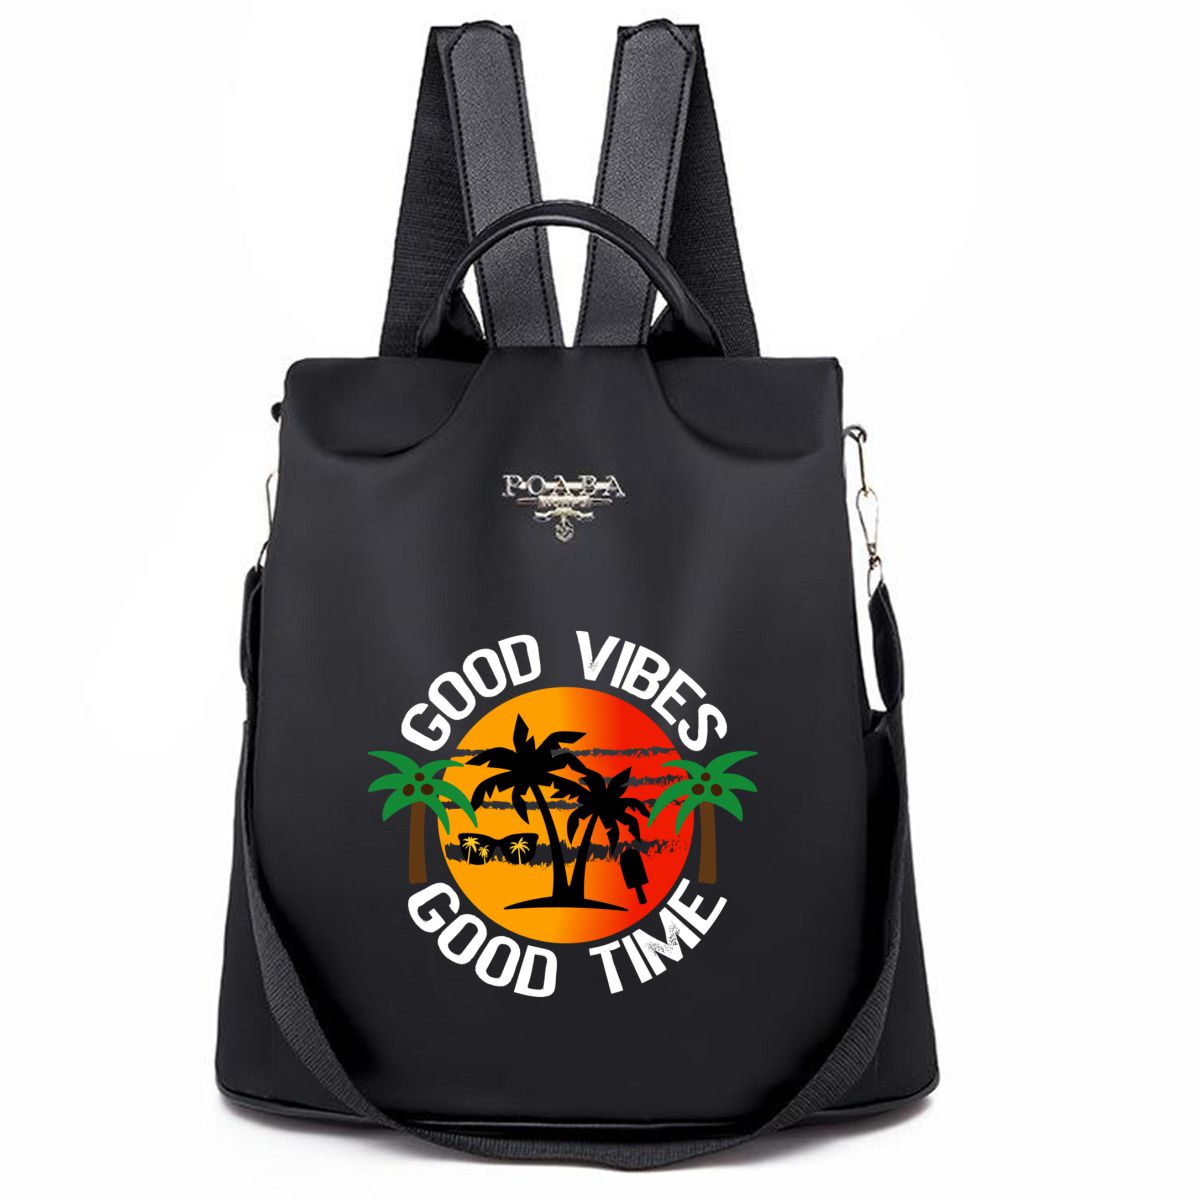 Good Vibes Good time Backpack No.PVHGRX